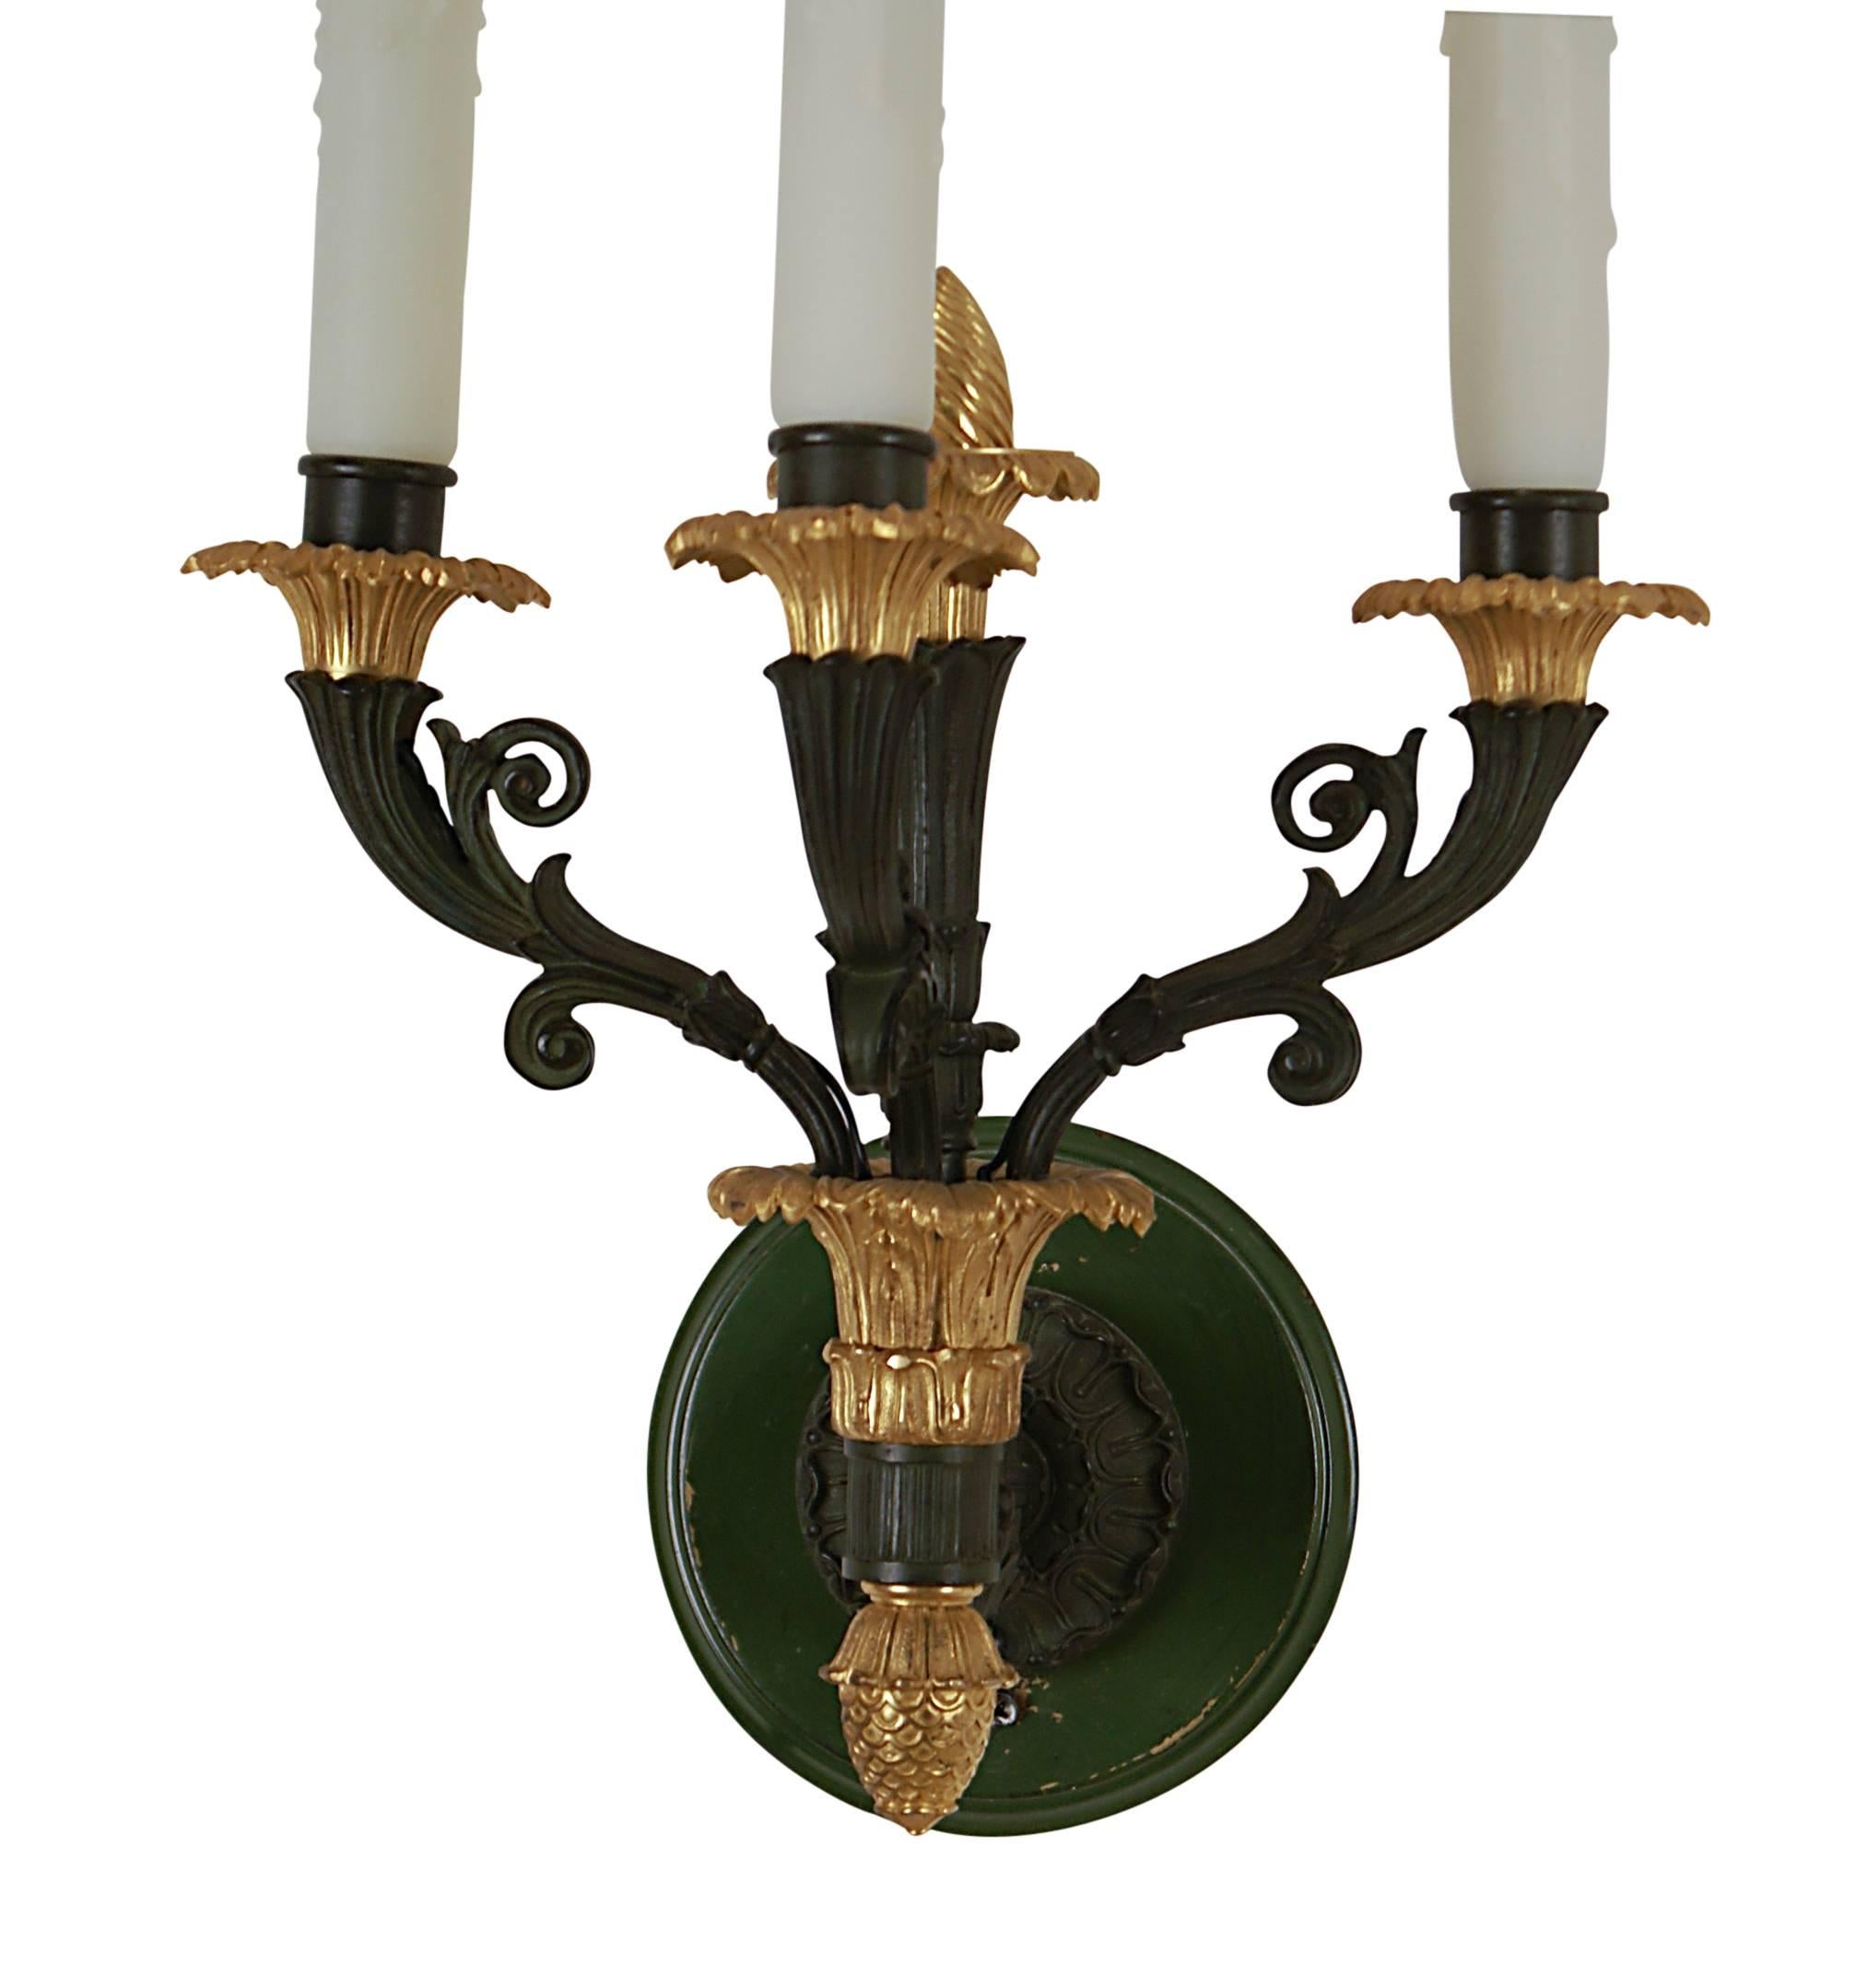 High quality reproduction of a French Empire pair of three light sconces in bronze and gilt bronze. We date these to about 1920 when they where made in France. Now wired for electricity with later dark green painted back plates.